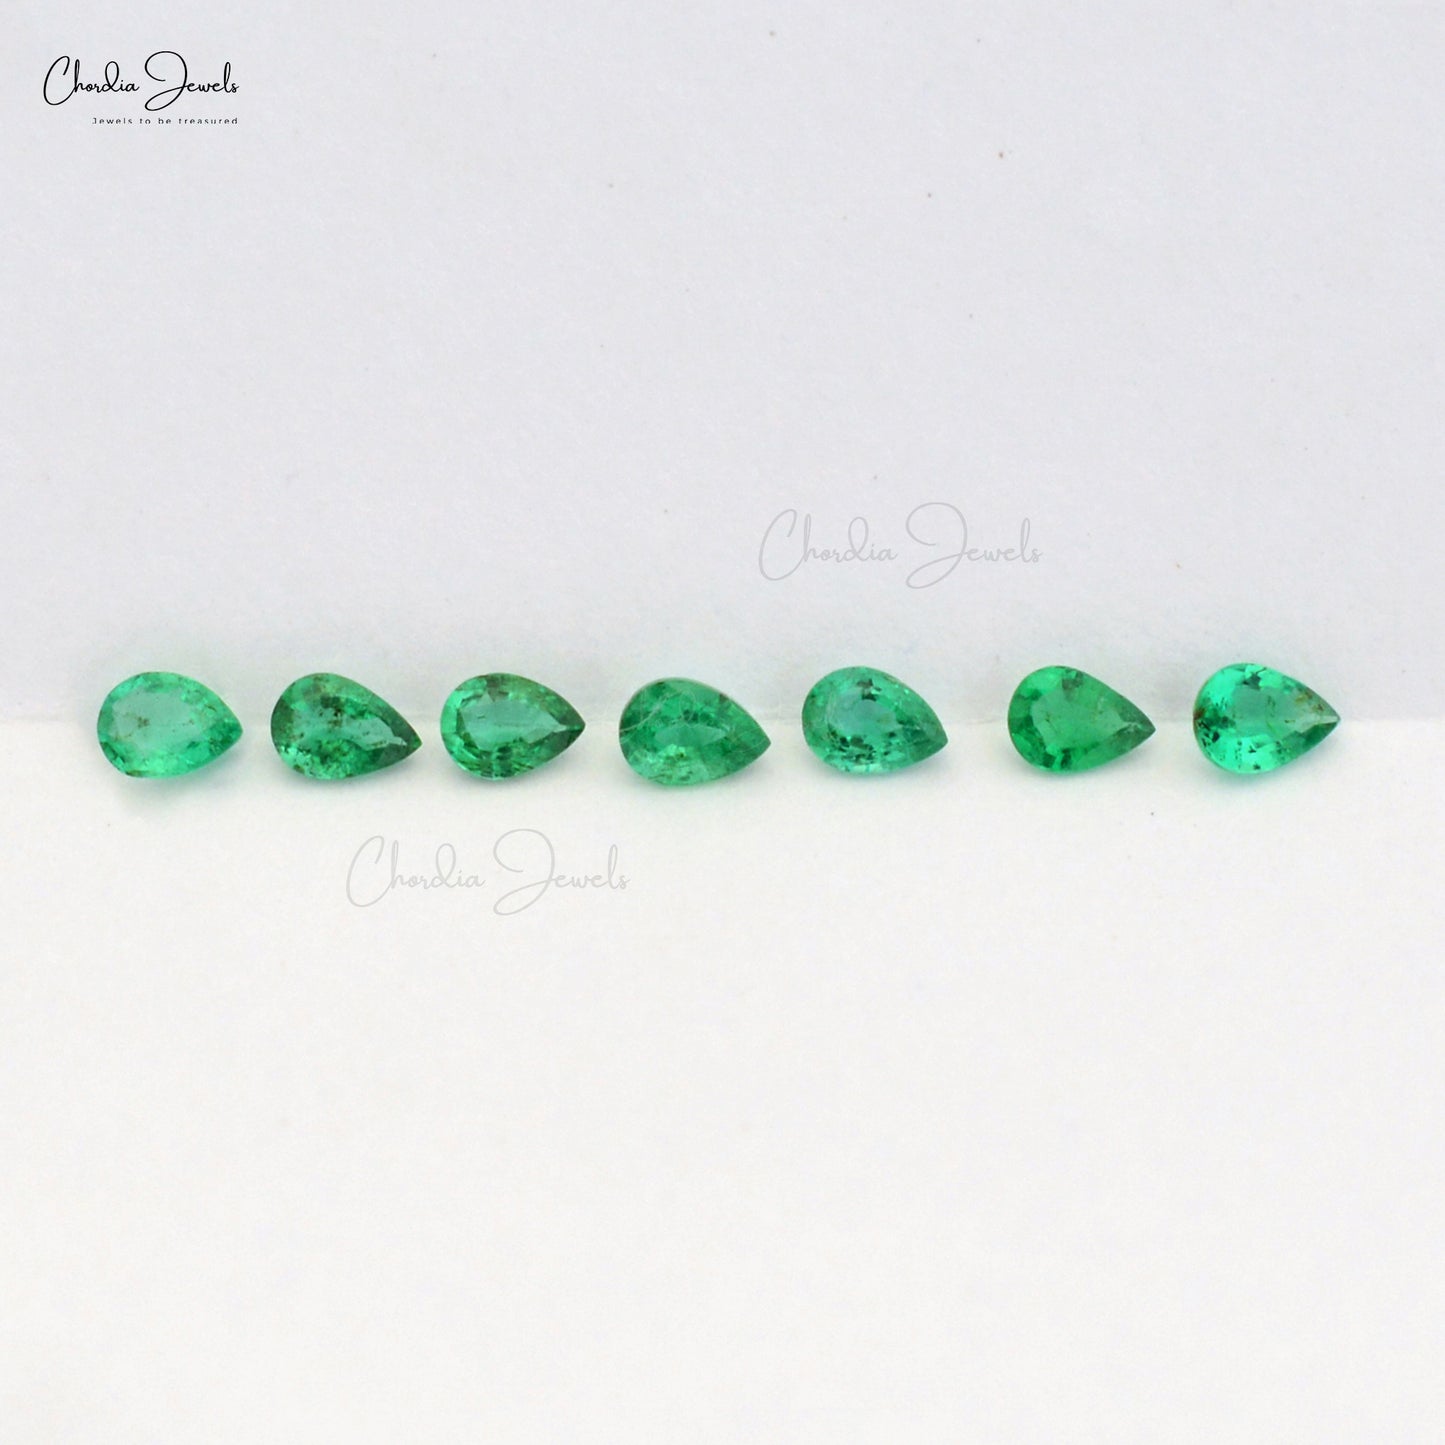 Loose Emeralds For Sale. to add to your collection or jewelry design